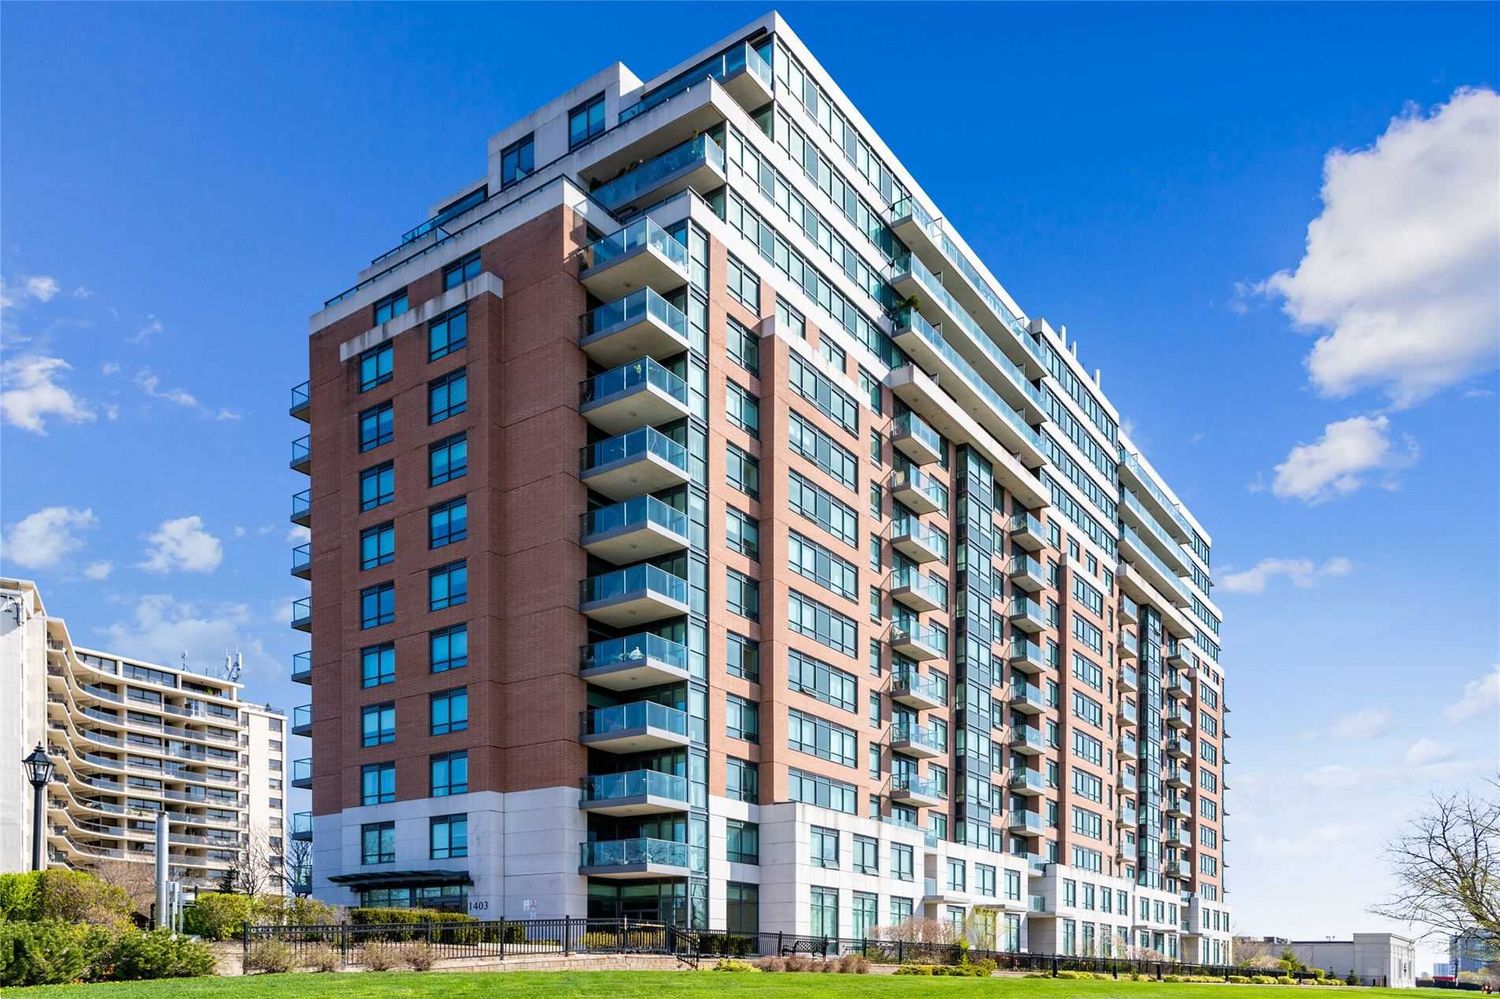 1403 Royal York Road. The Royal York Grand Condos is located in  Etobicoke, Toronto - image #1 of 2